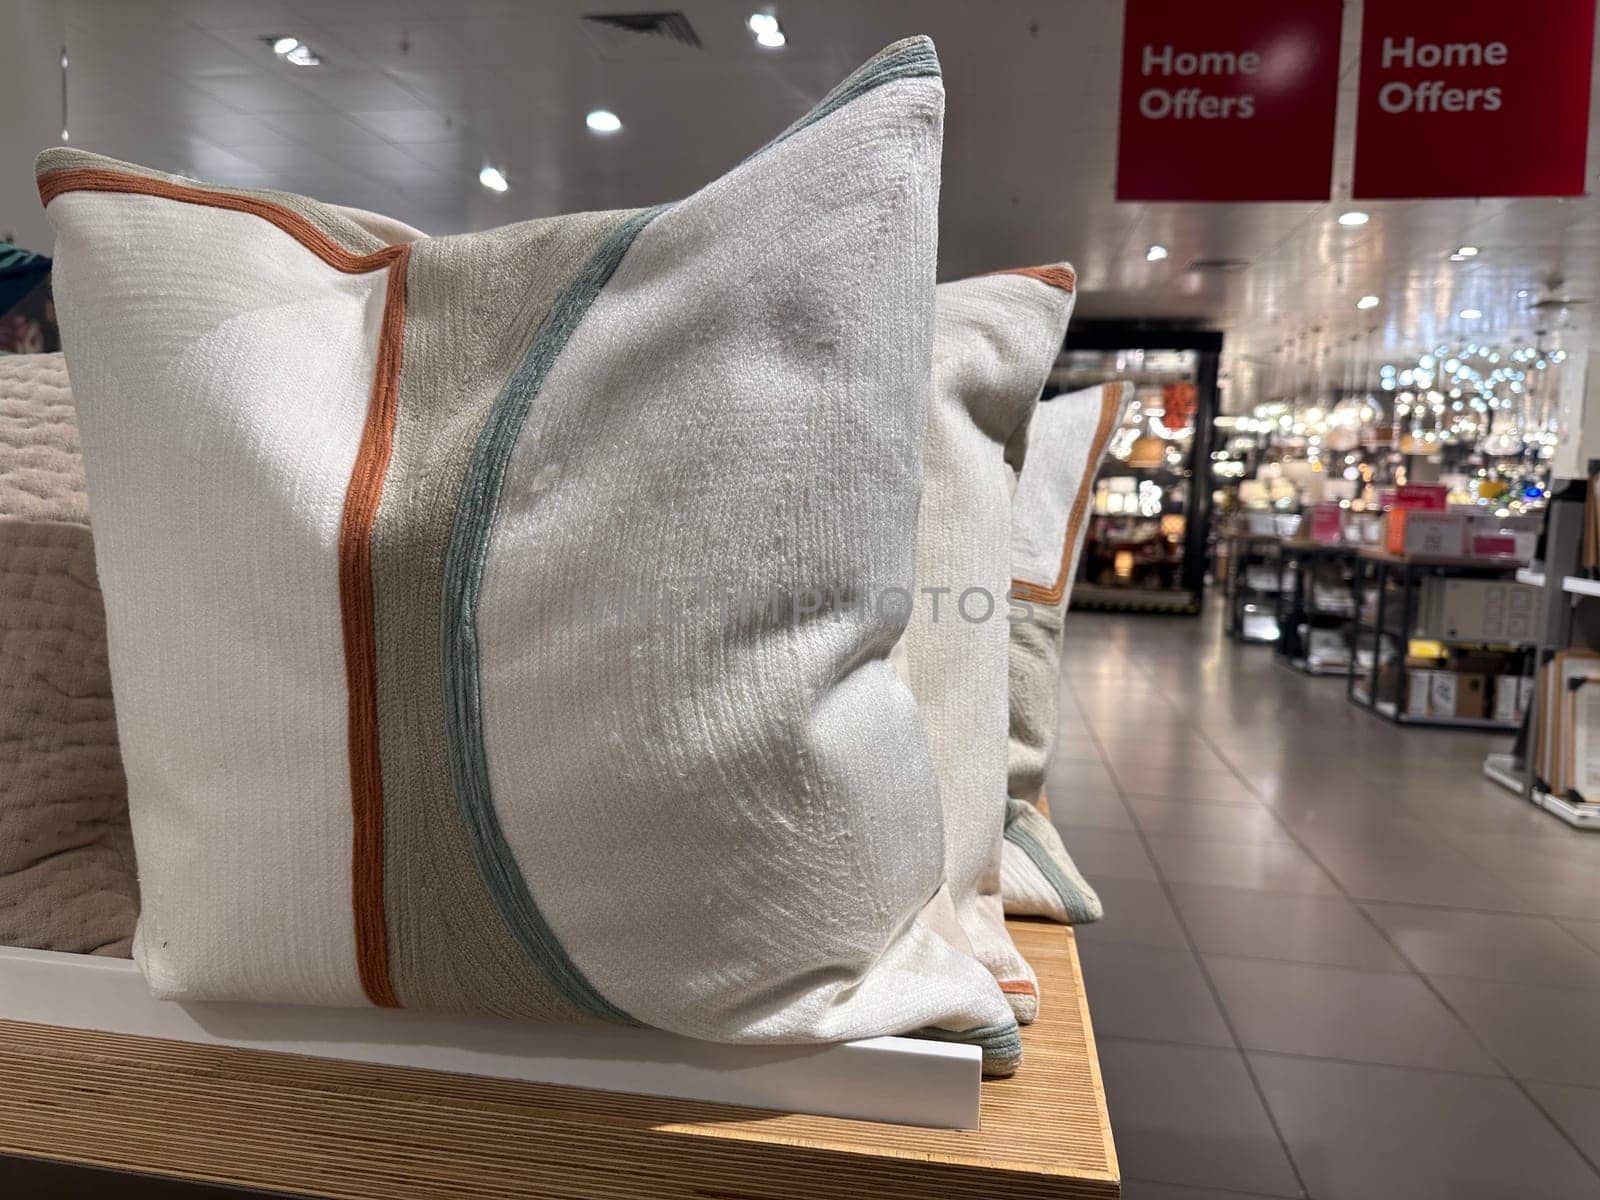 Pillow cushion for sale at department store